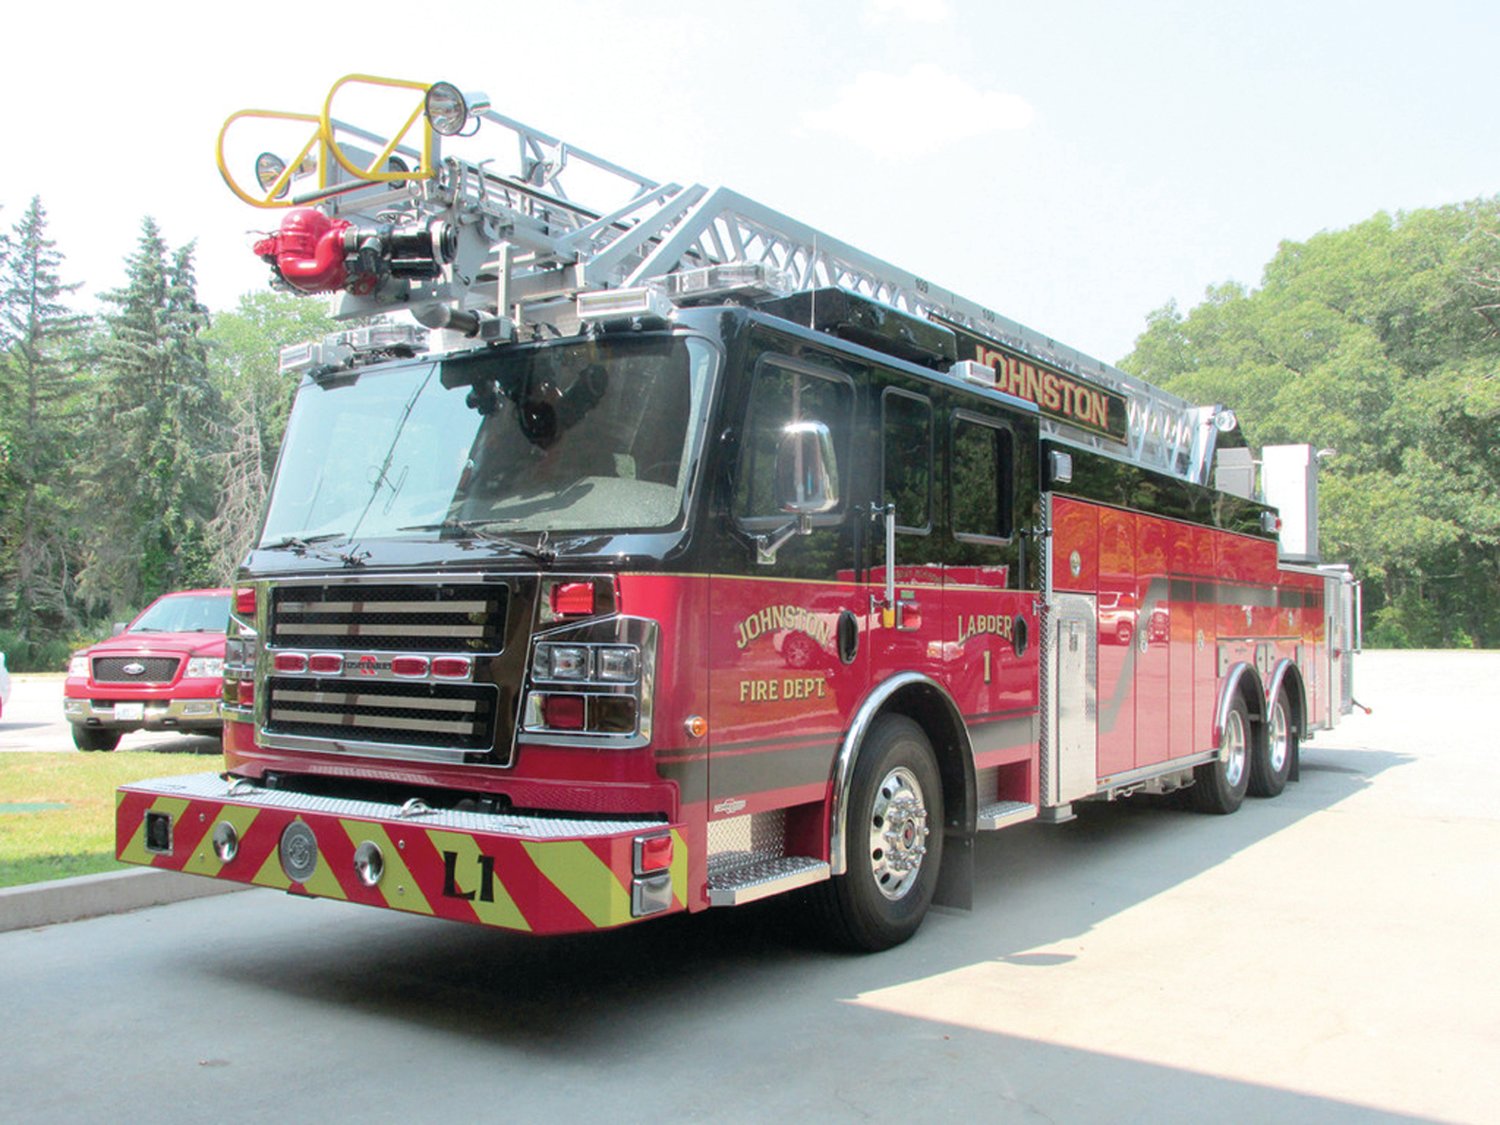 NEW ADDITION (2015): The Fire Department’s fleet now includes this state-of-the-art 2014 Rosenbauer ladder truck.
UPDATE: This truck will be replaced with a new Spartan ladder truck.